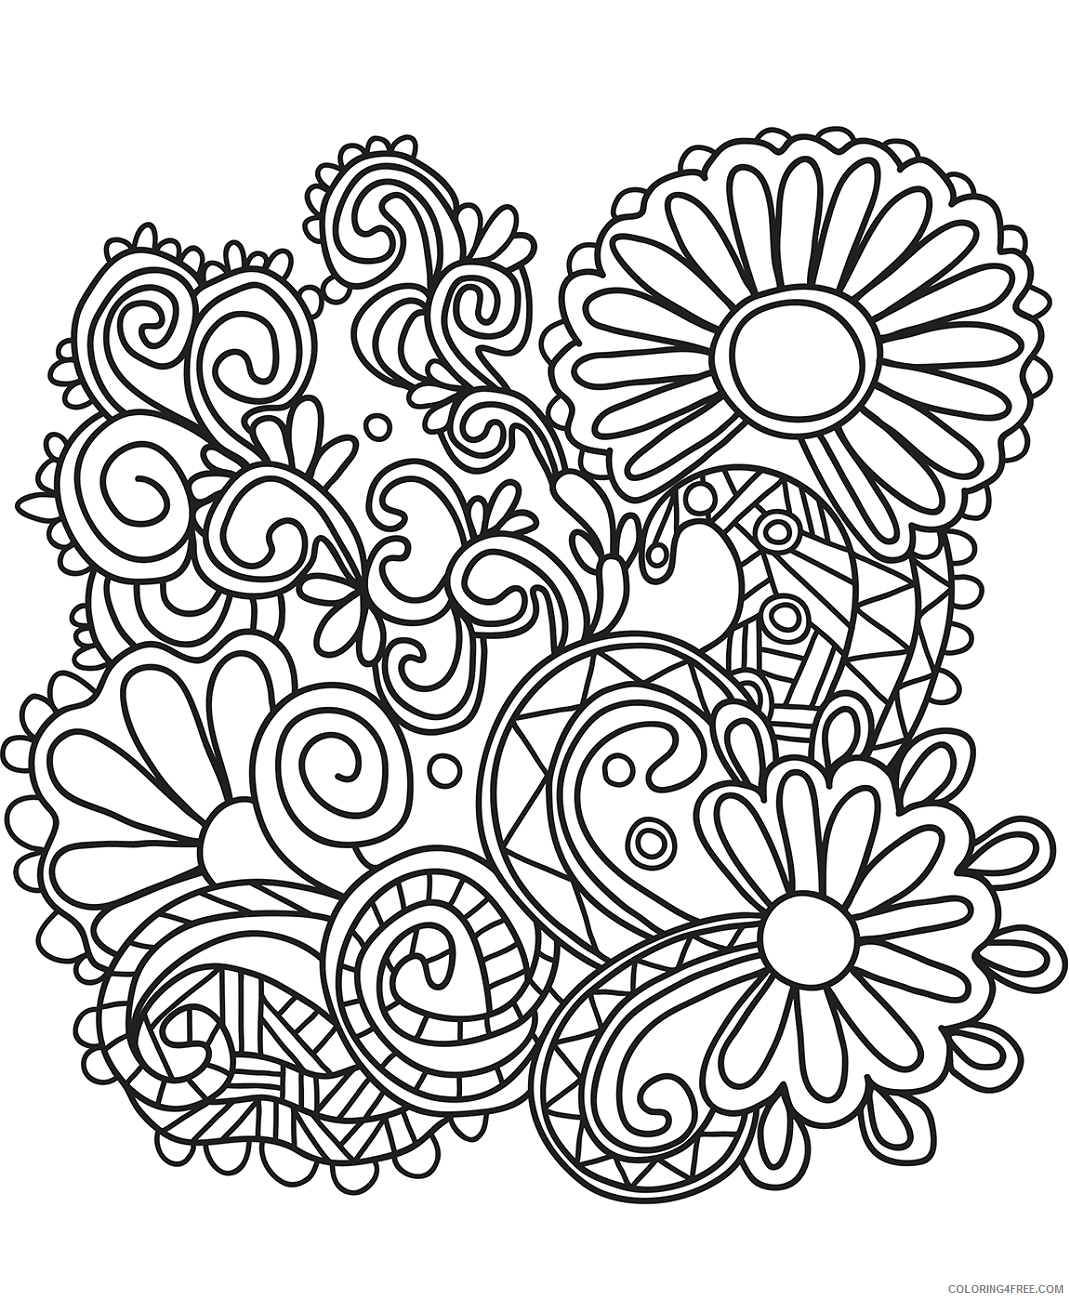 Sunflower Coloring Pages Nature sunflower doodle art Printable 2021 728 Coloring4free